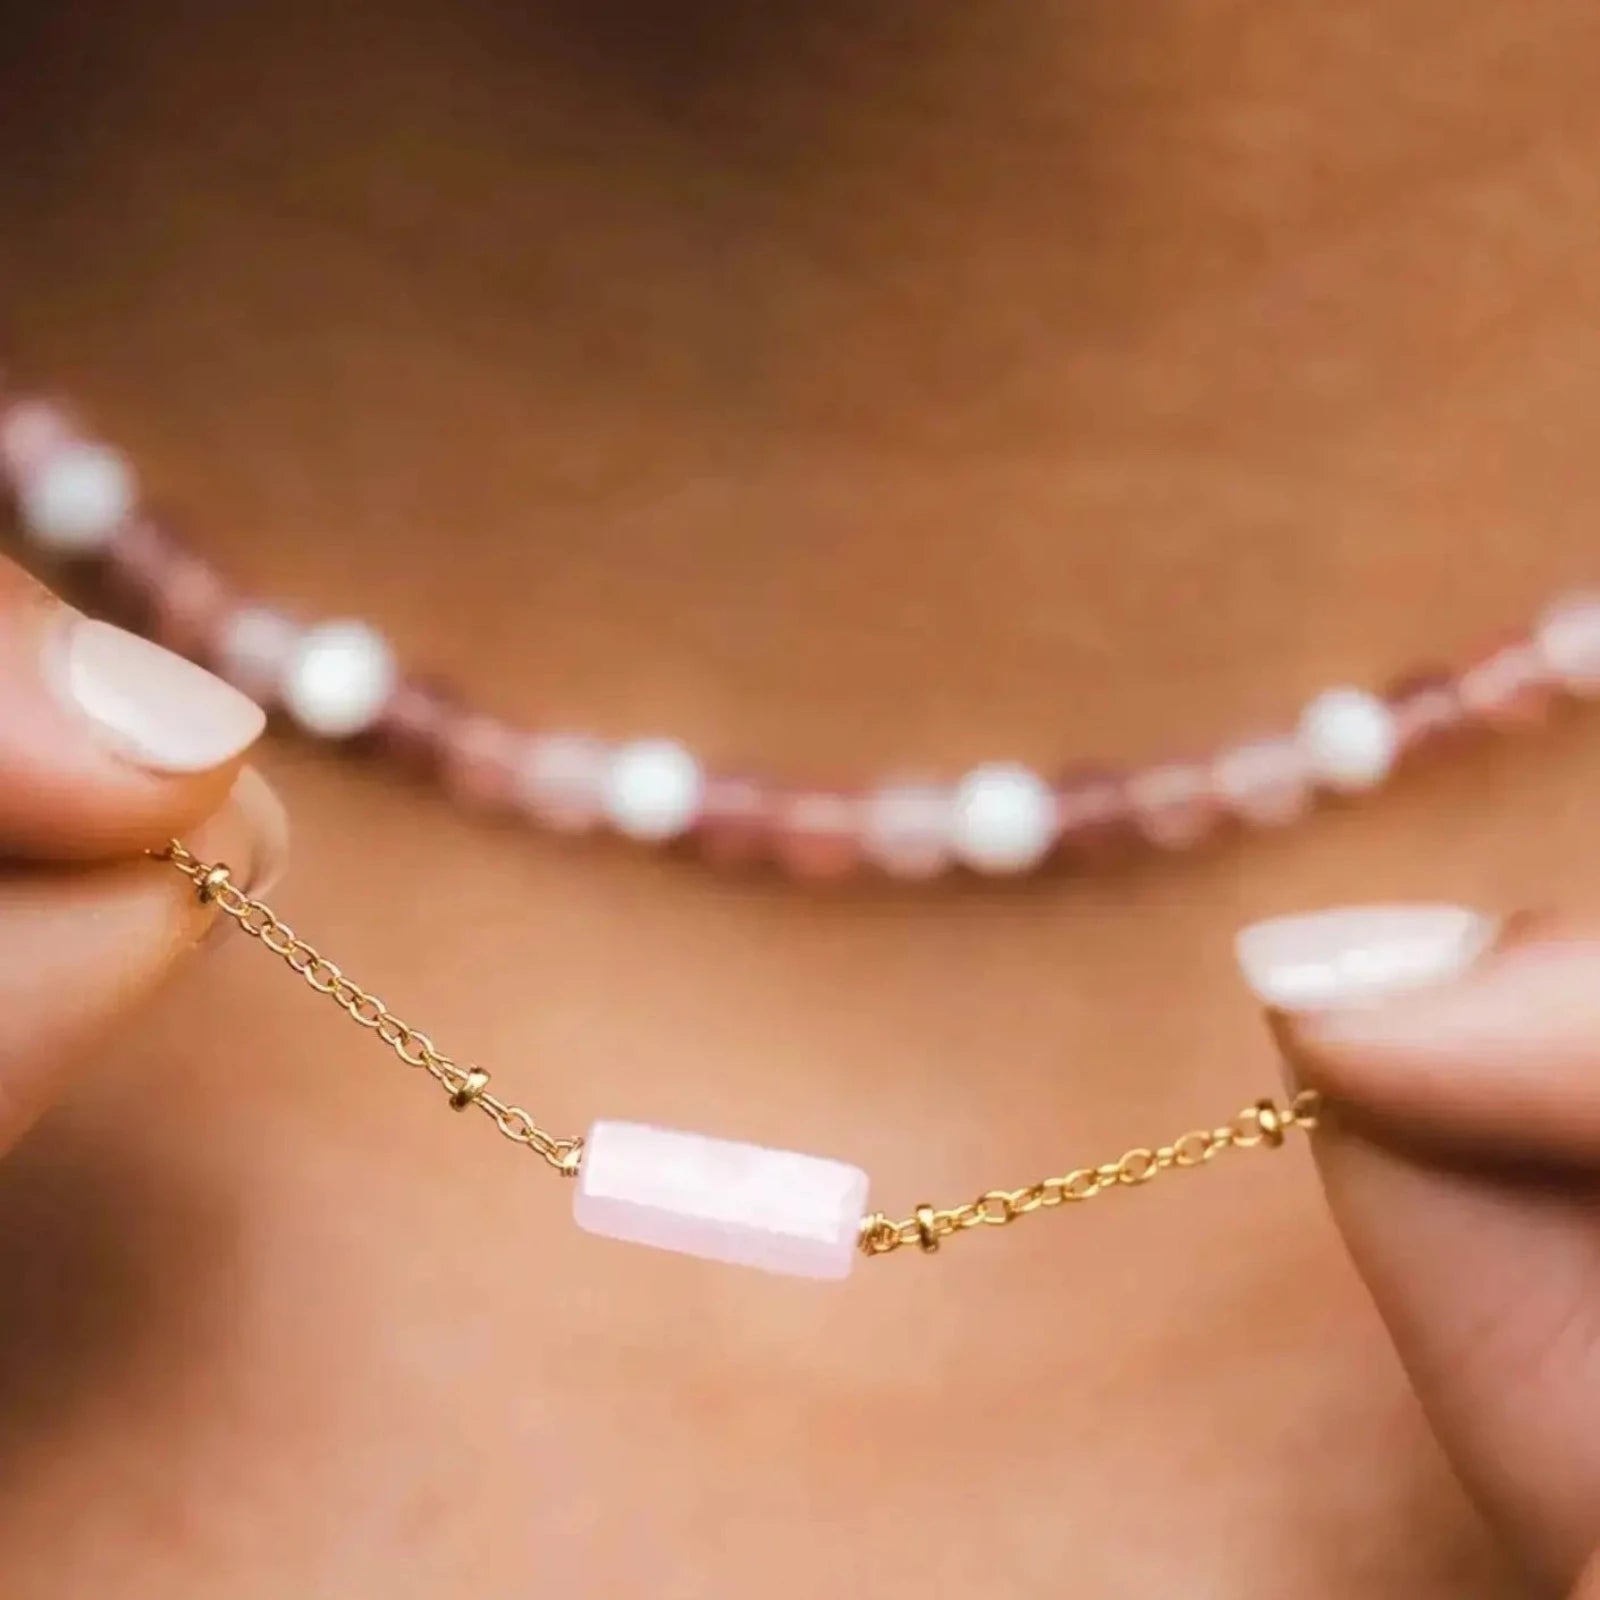 Rose Quartz Stone Necklace on Gold Chain shown on a Model